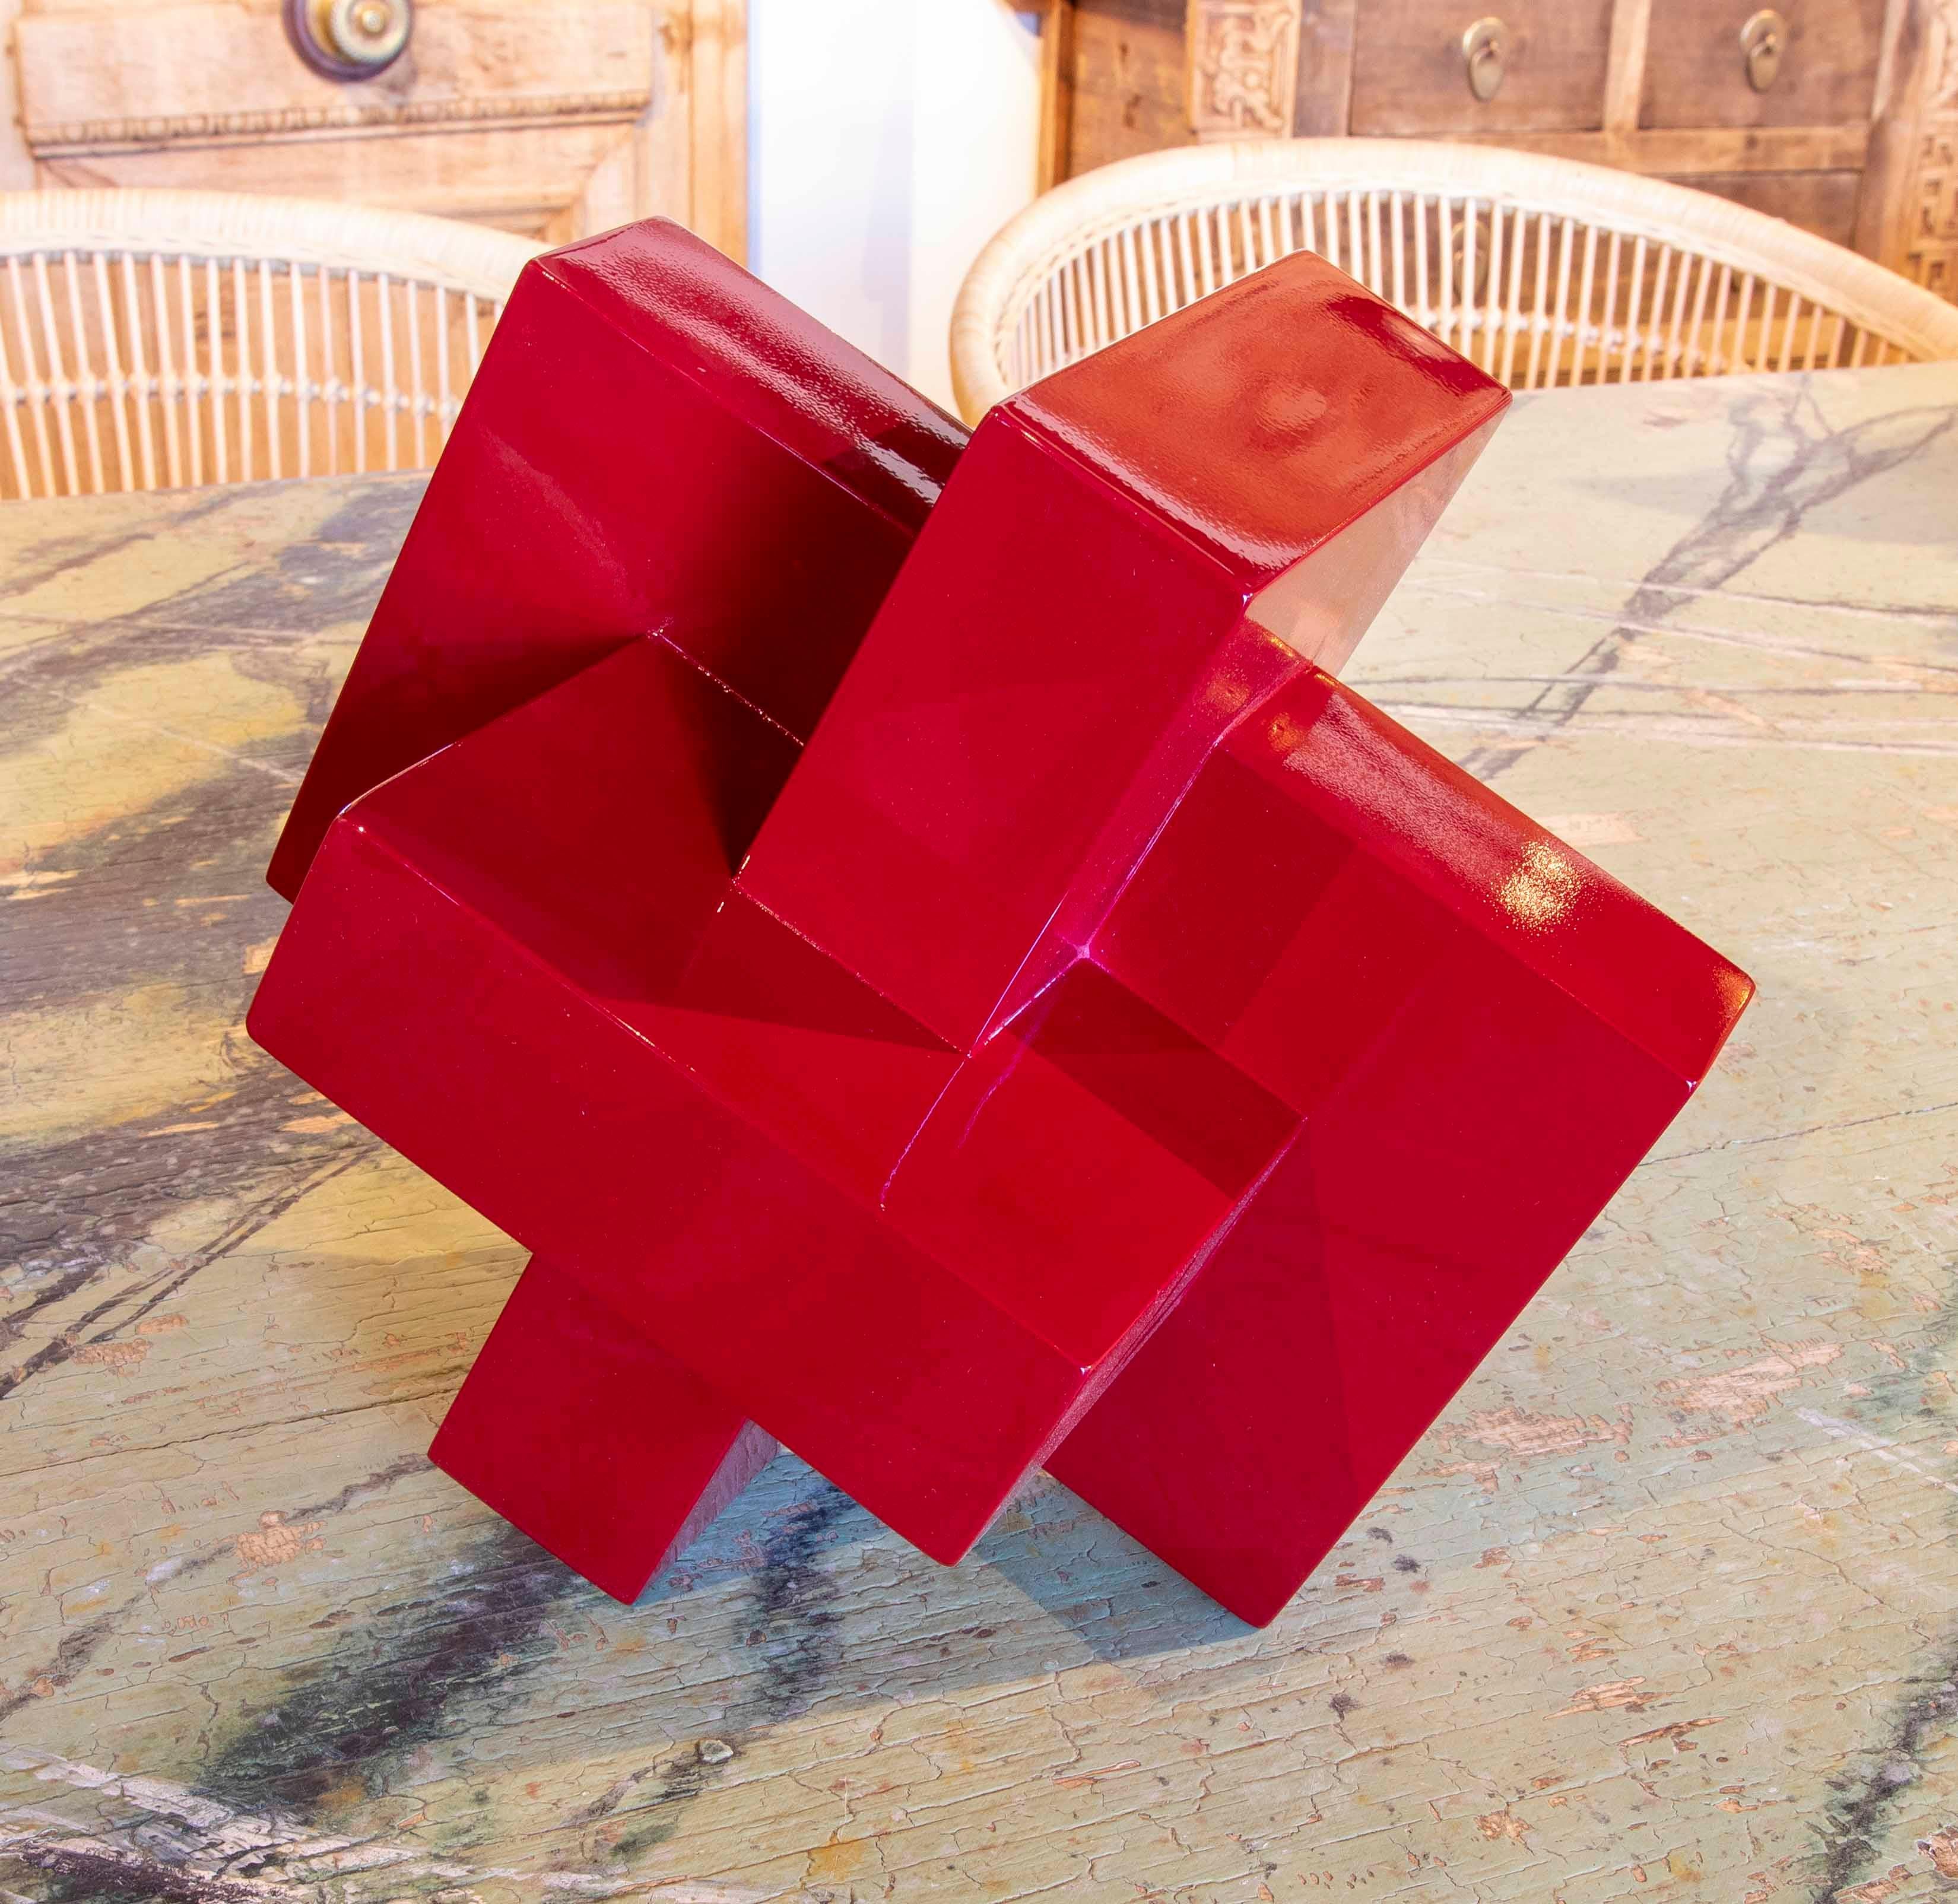 Spanish Modern Red Lacquered Wood Sculpture with Intertwined Straight Forms For Sale